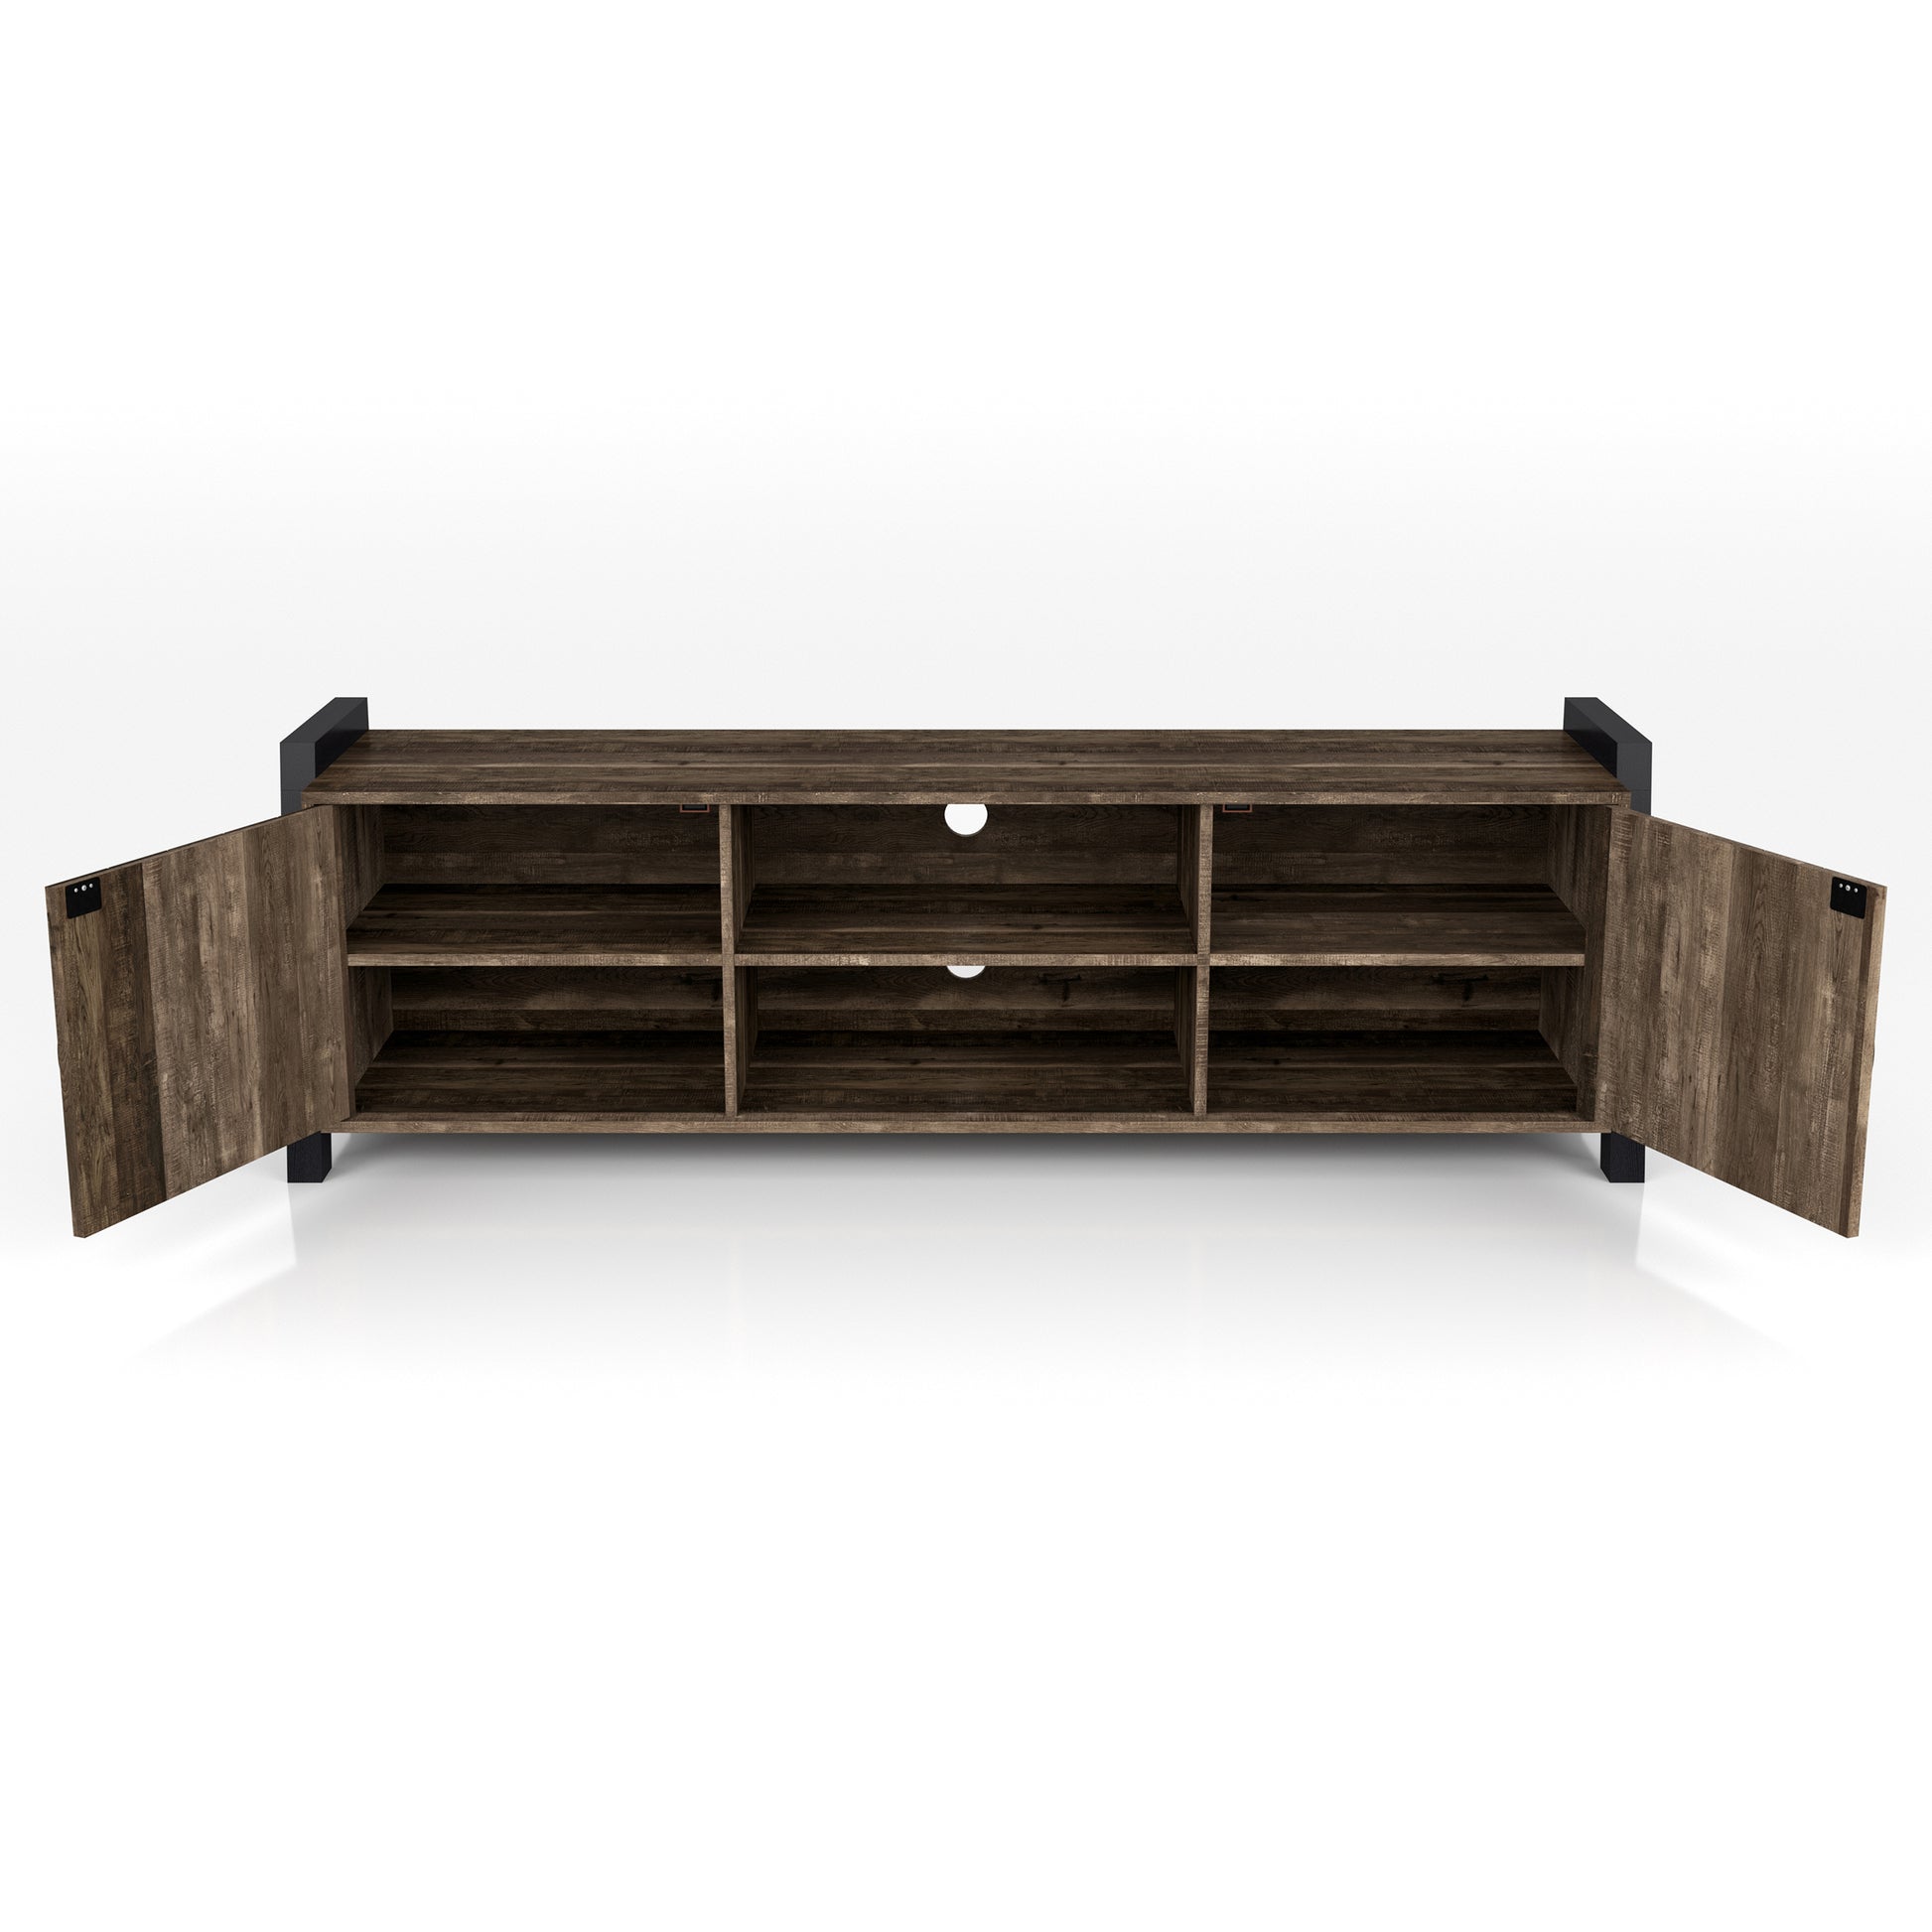 Front-facing farmhouse reclaimed oak and black six-shelf TV stand with both doors open on a white background